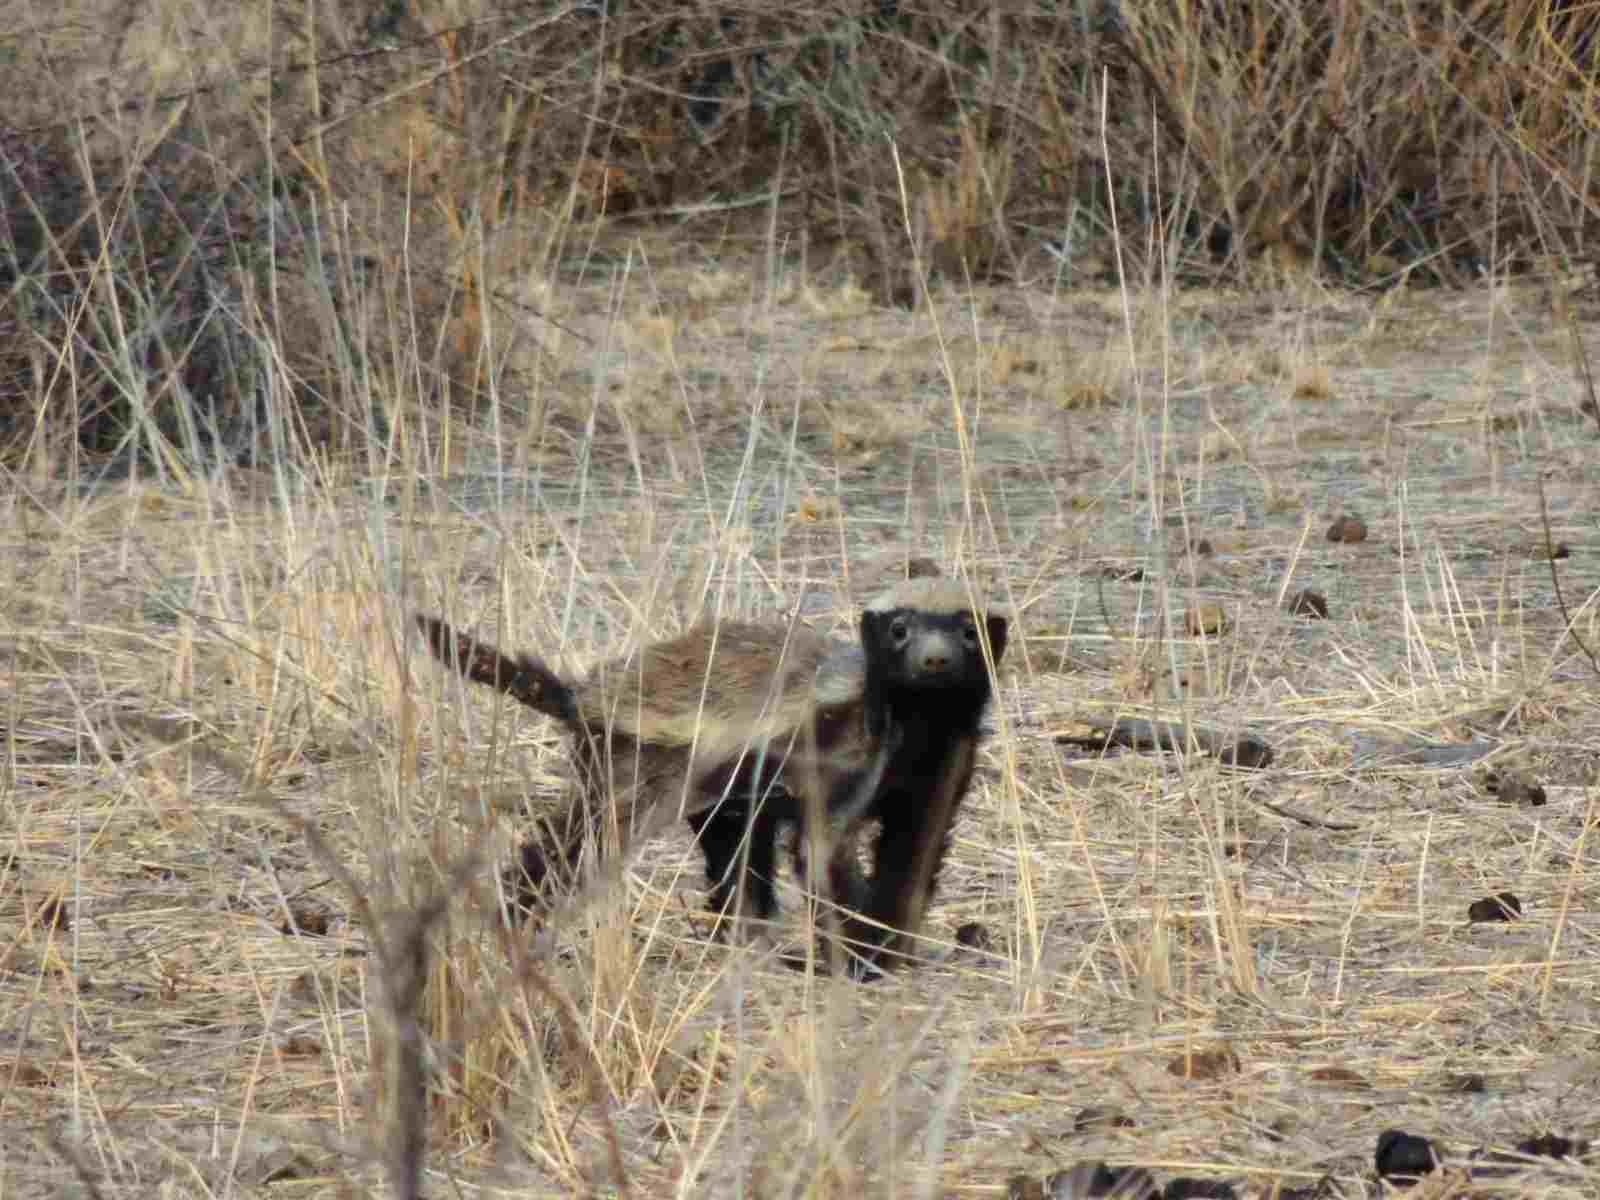 Honey Badger Vs Lion: Habitat Overlap is Not Uncommon Between Honey Badgers and Lions (Credit: Annette Seifart 2013 .CC BY-ND 2.0.)